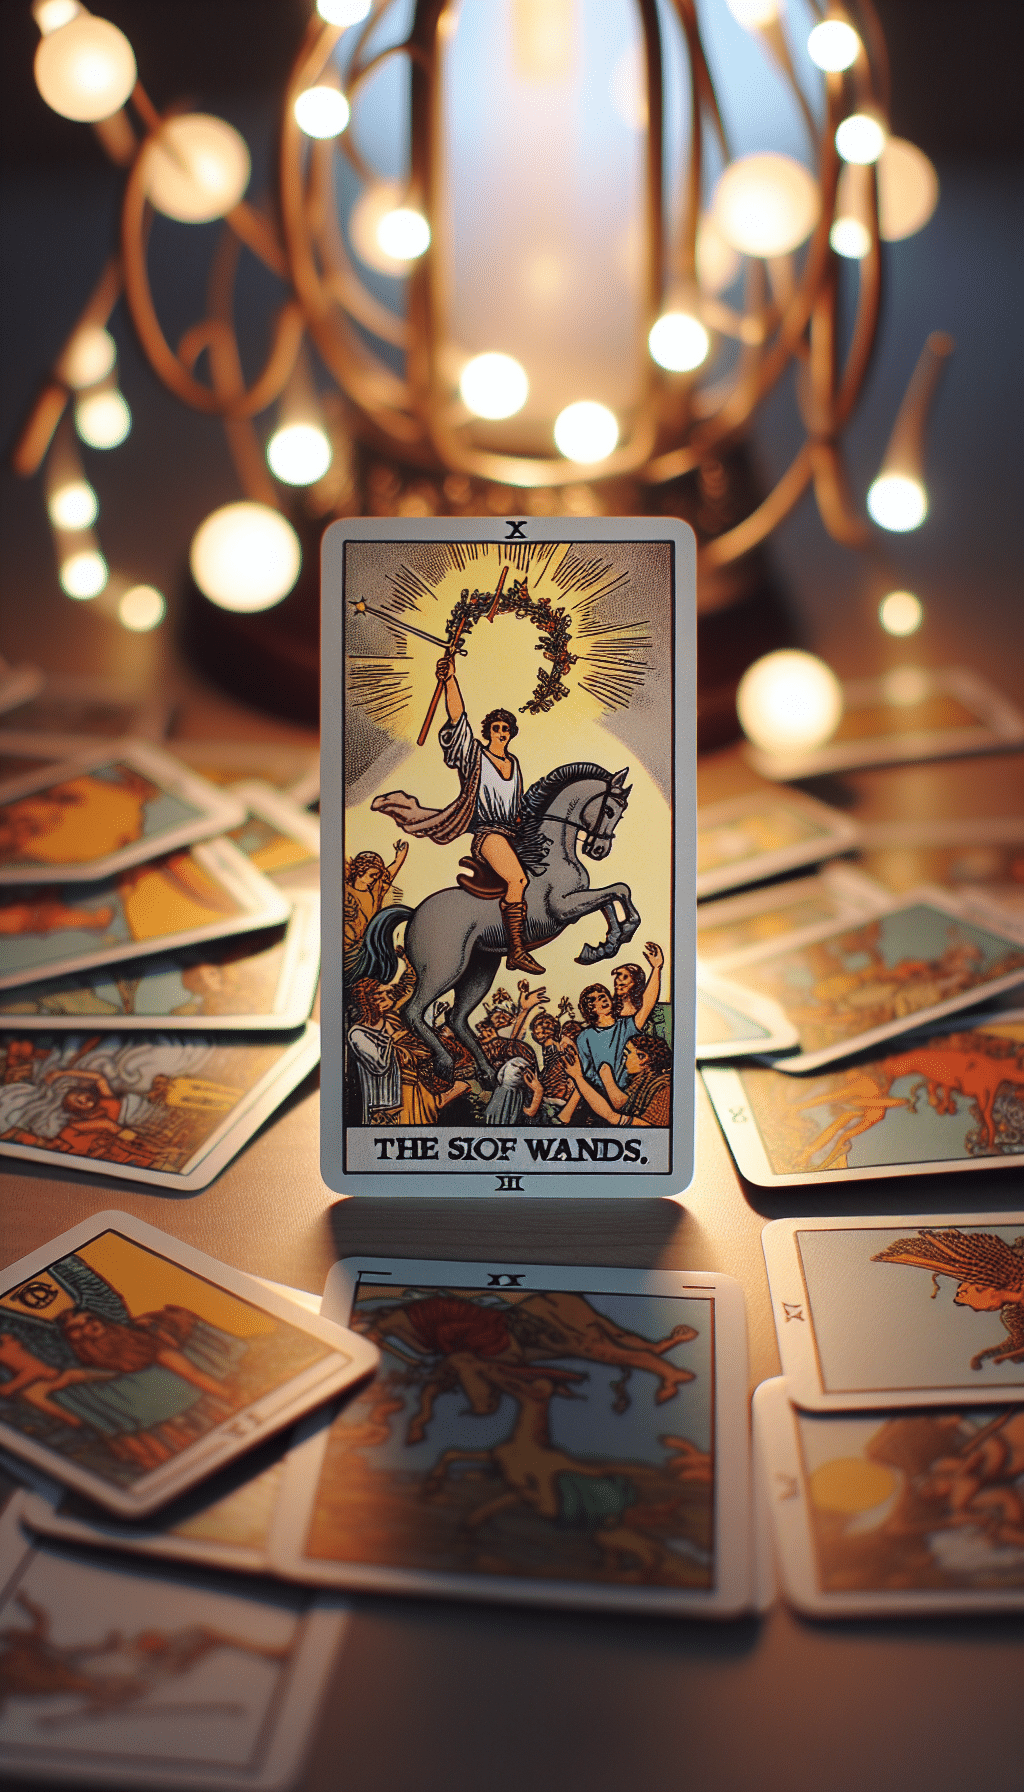 The Triumph of Success: The Six of Wands Explained